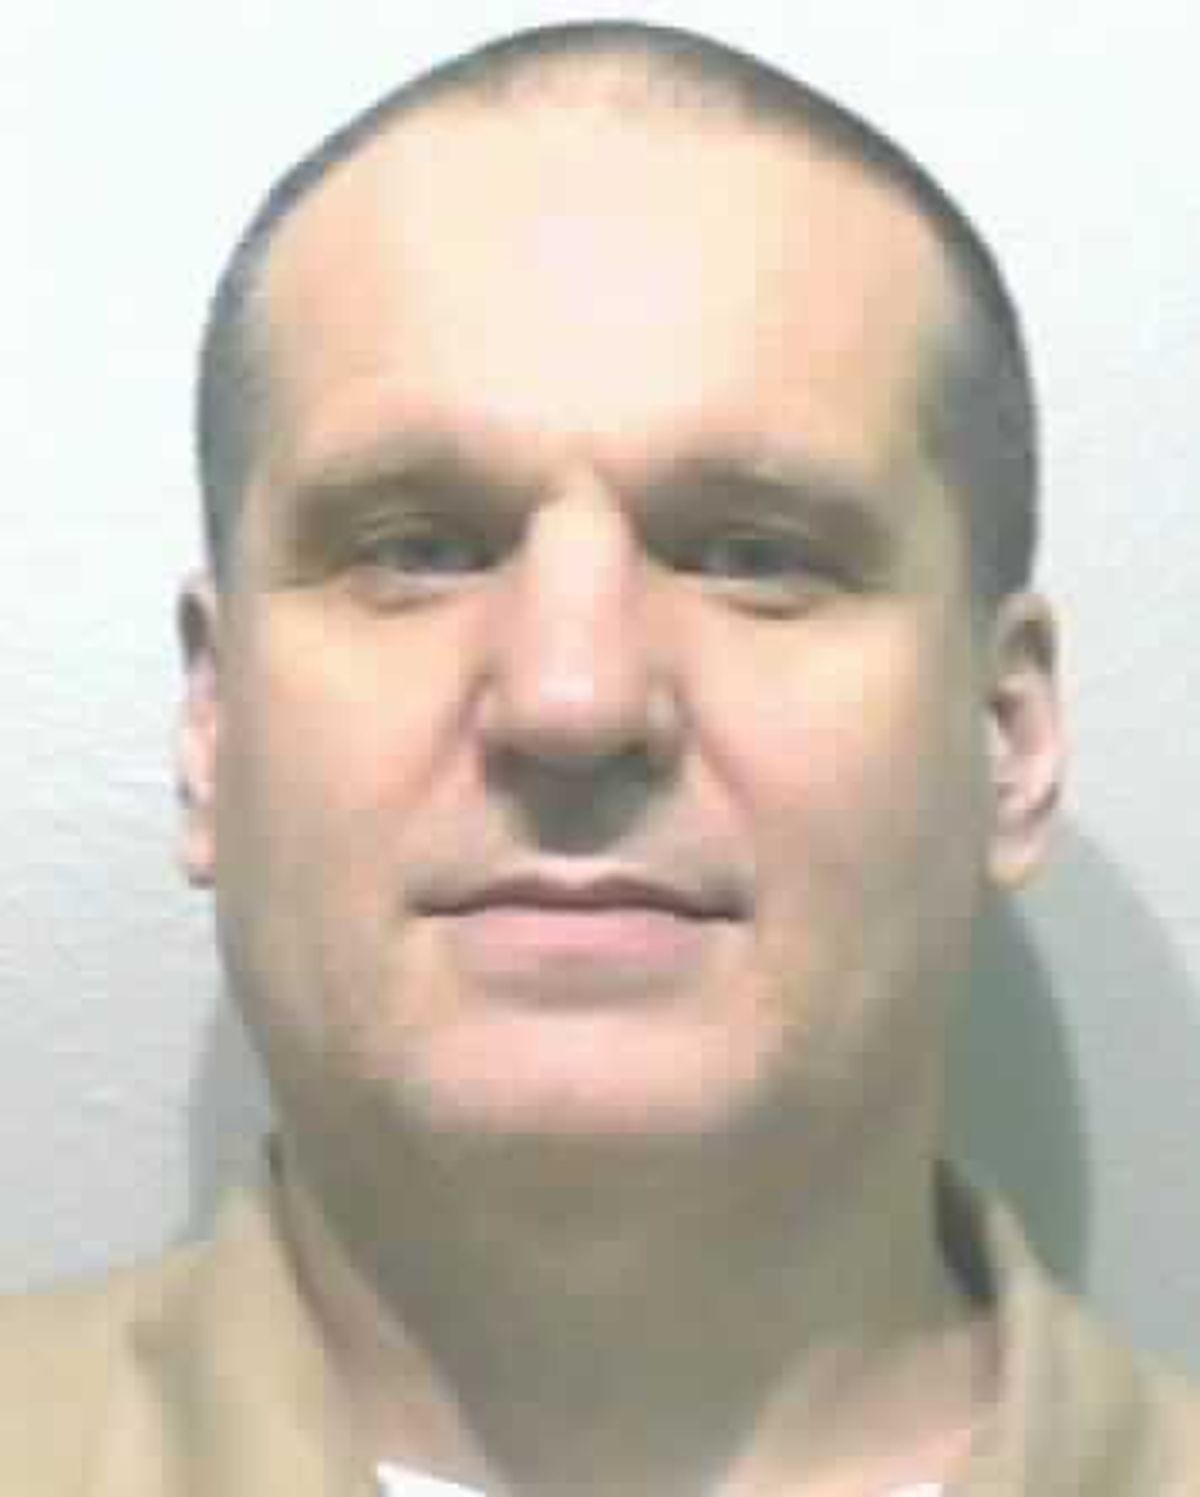 Spokane sex offender Byron Scherf, 52, is suspected of murdering a prison guard. (Washington Department of Corrections)